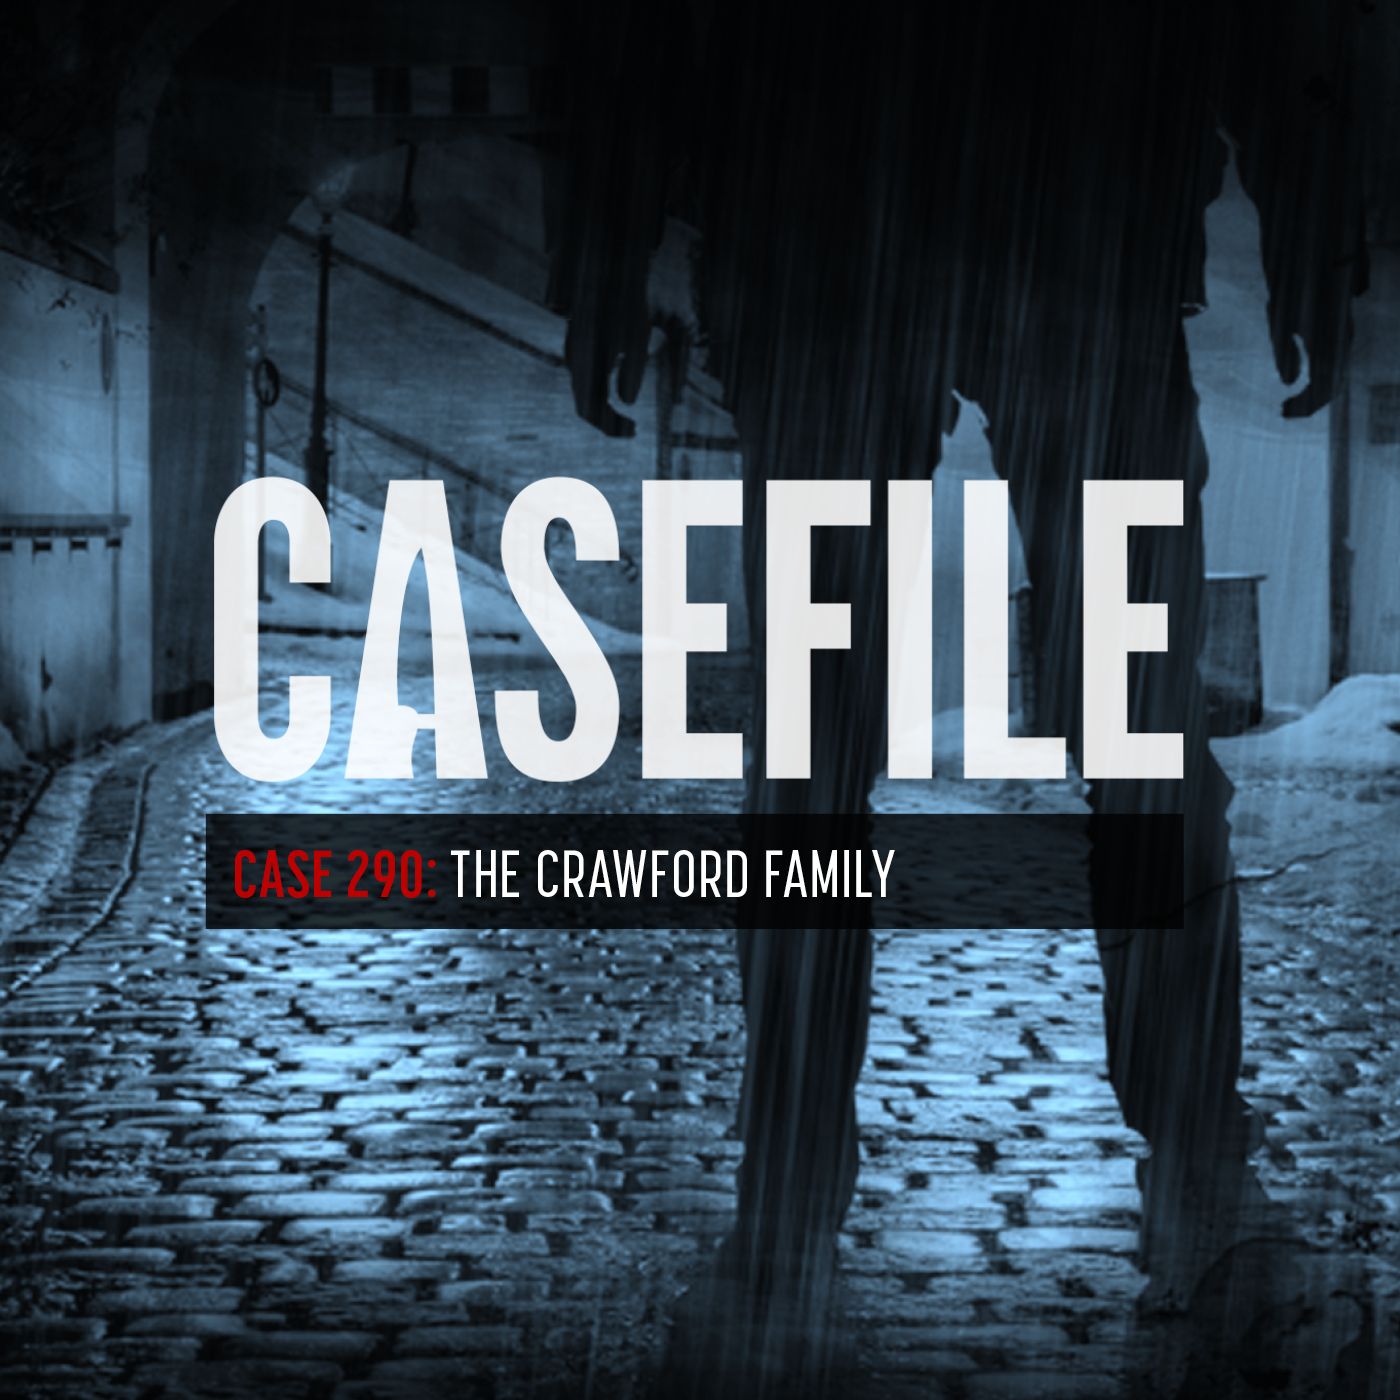 Case 290: The Crawford Family